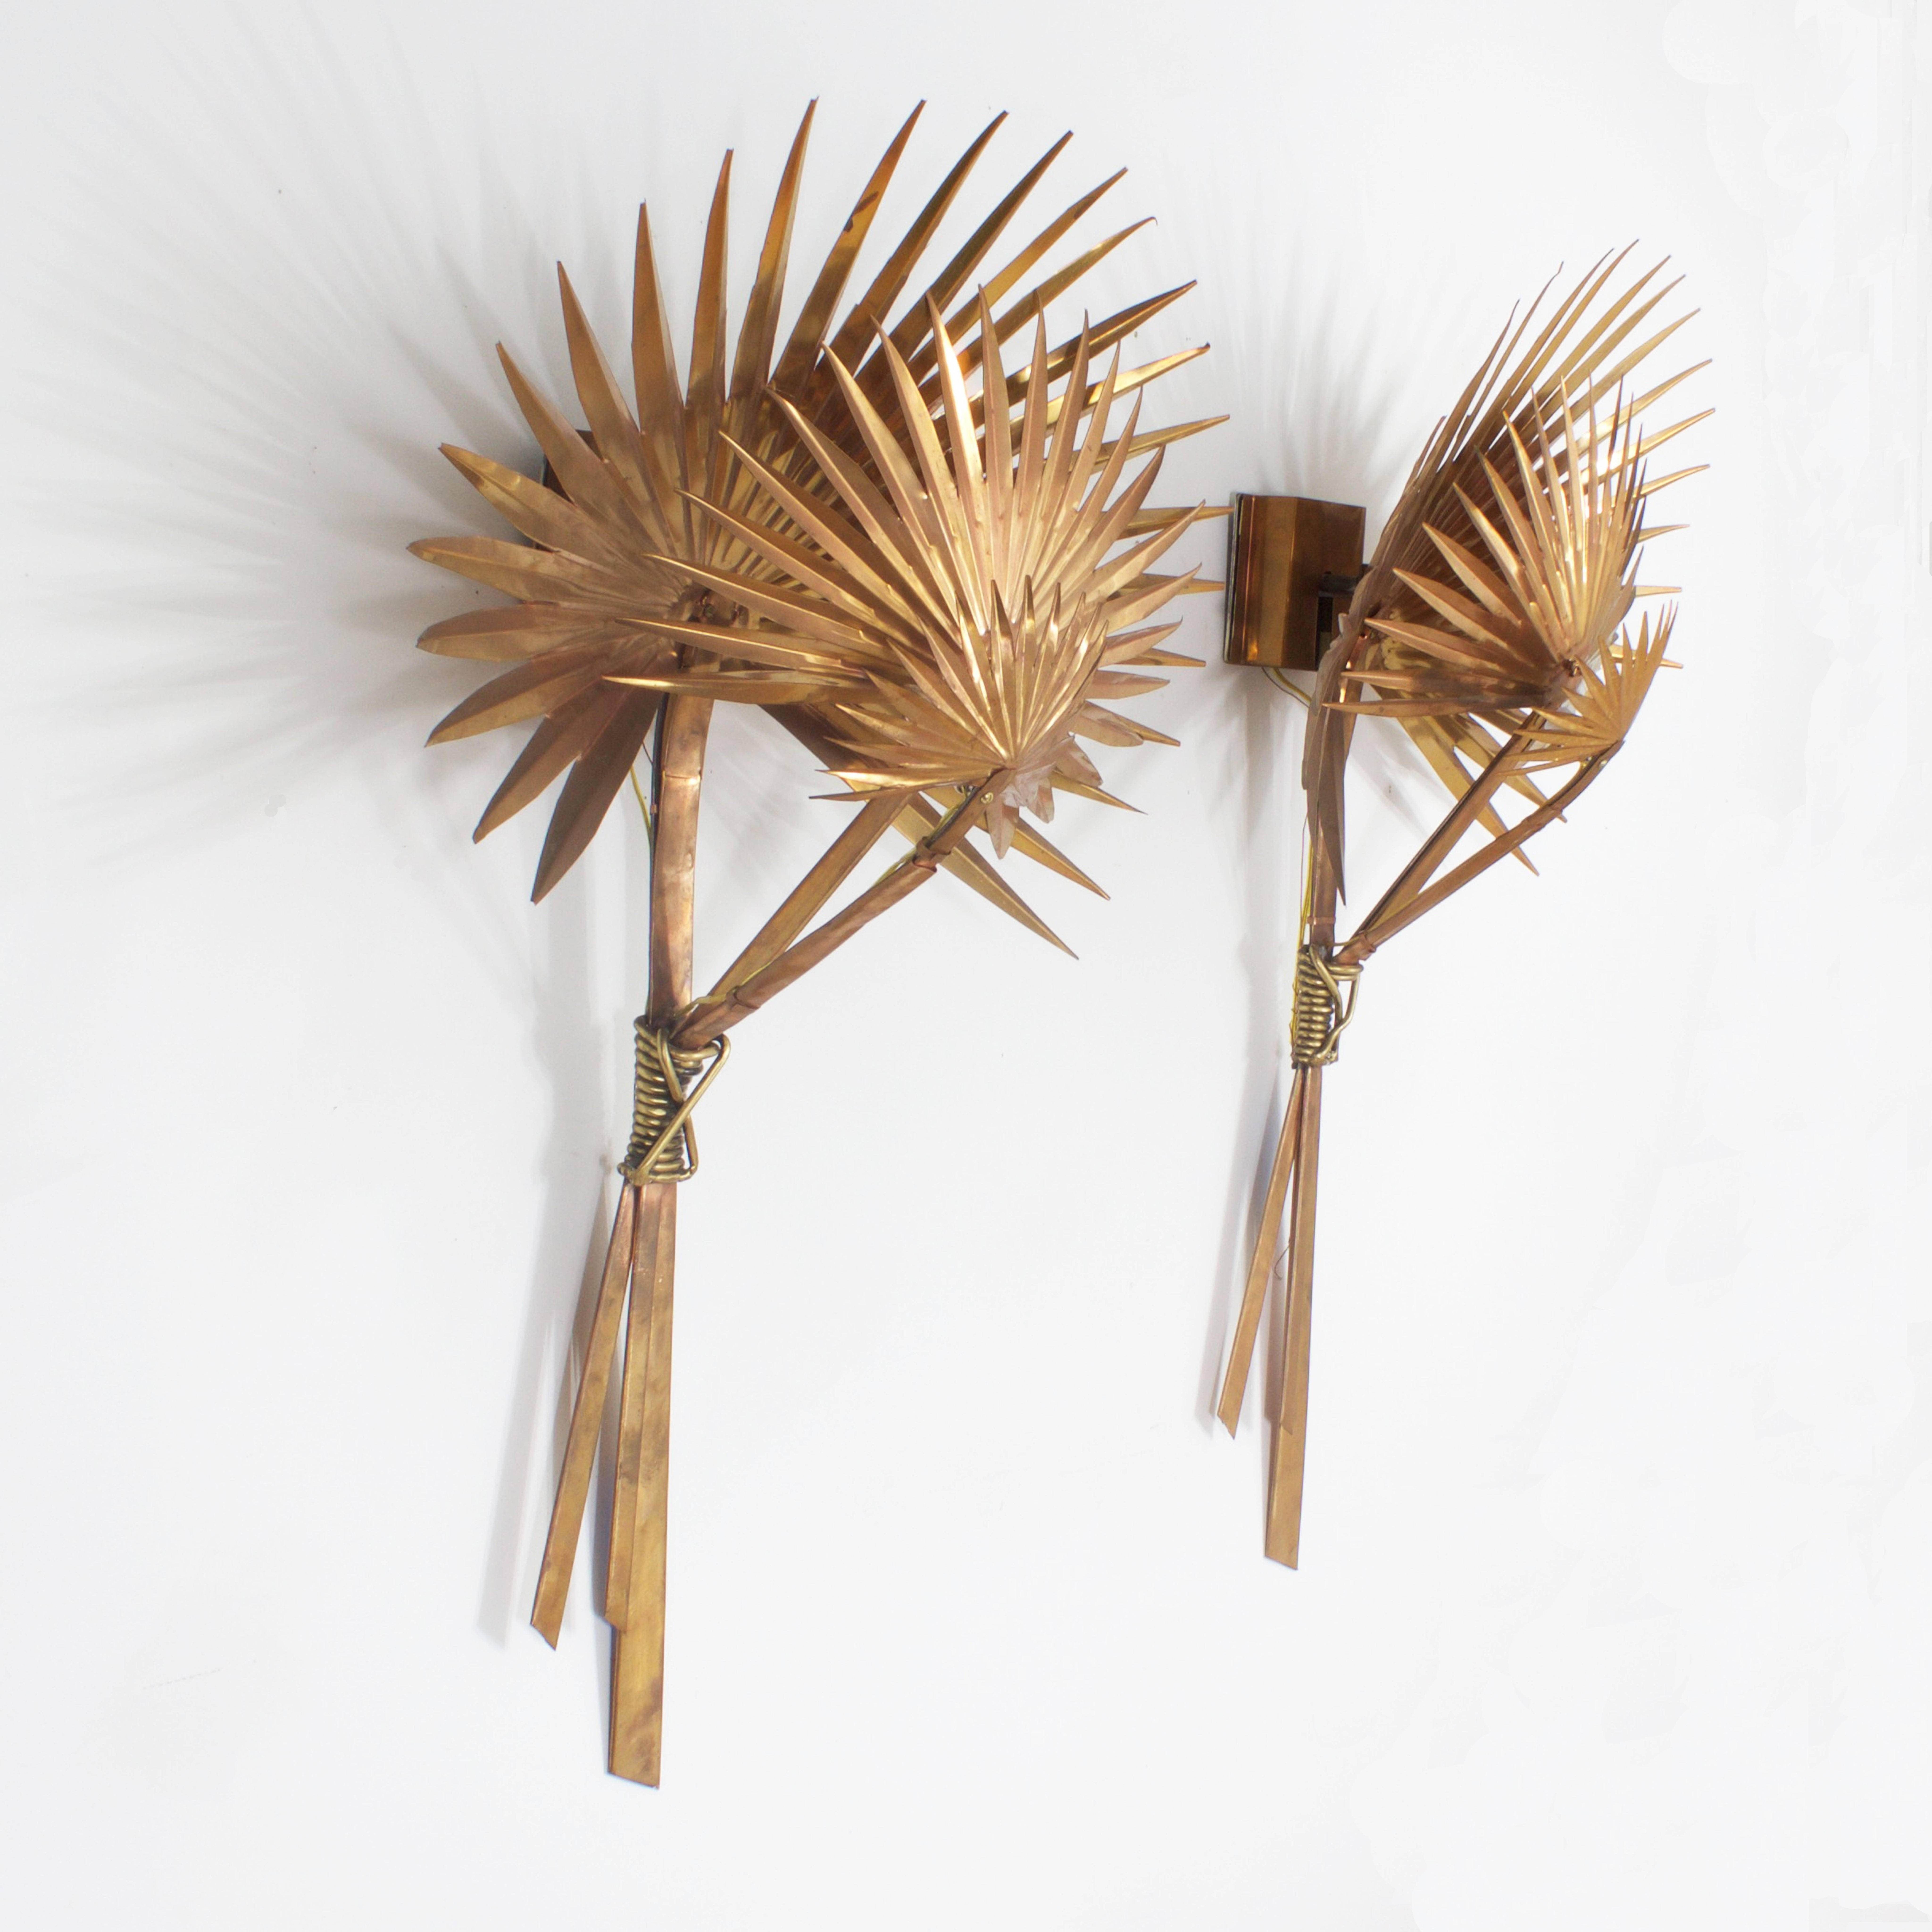 Striking Mid-Century pair of very large copper palm tree leaf sconces by Mario Villa, with plenty of decorative punch. Composed of three layers of copper palm leaves strapped together with brass string. Will create dramatic shadows on the wall when